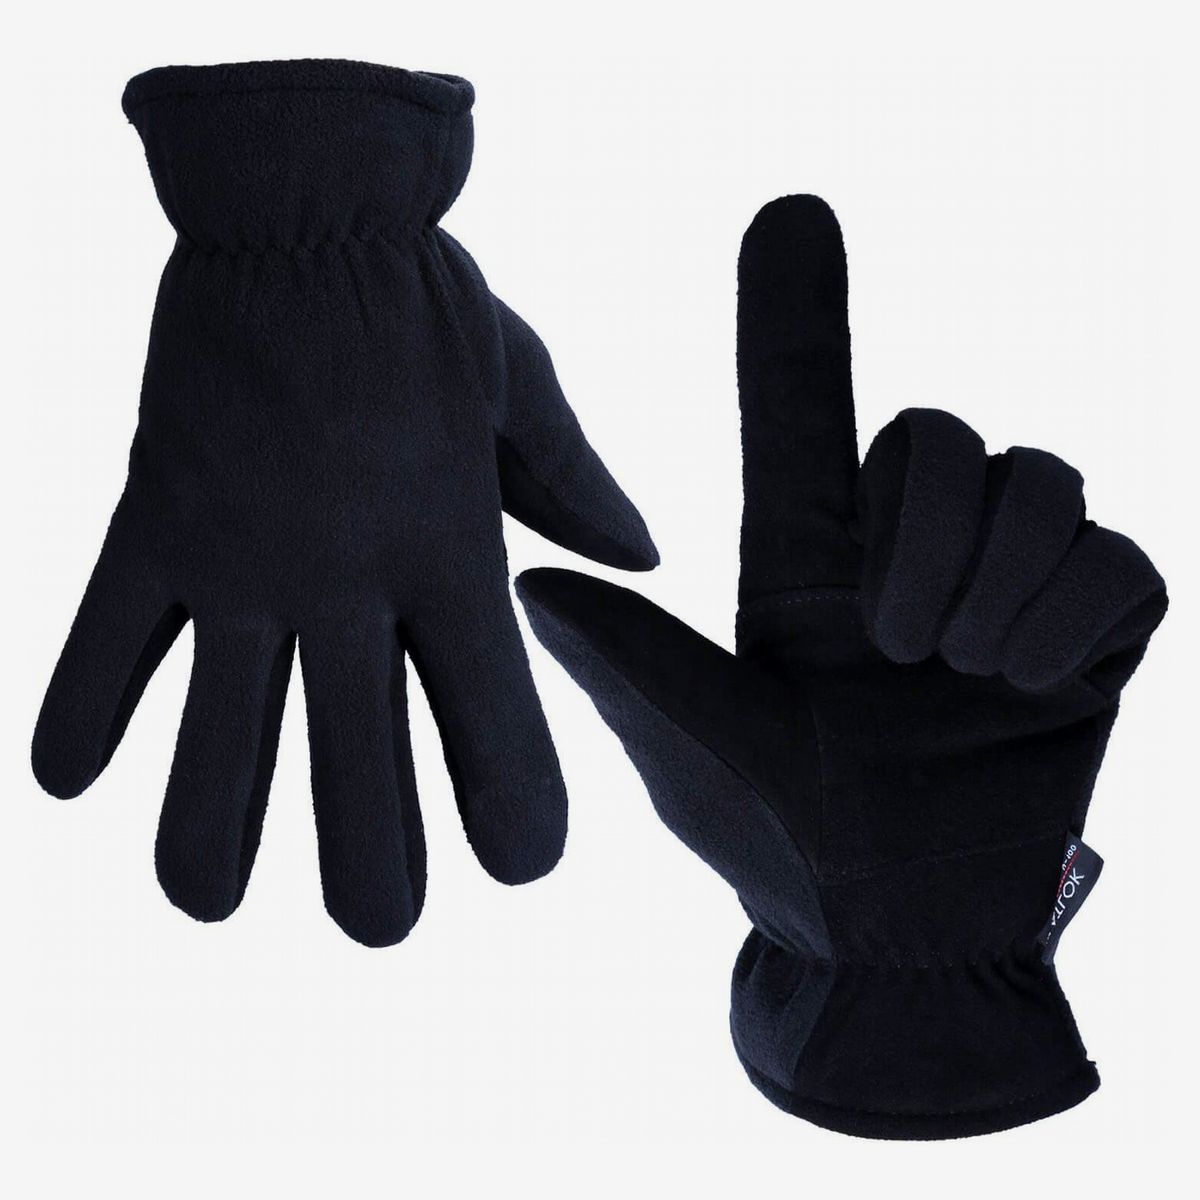 Warm & Cozy Men'S Thermal Gloves Free Size Polyester For Outdoor Travel & Daily 